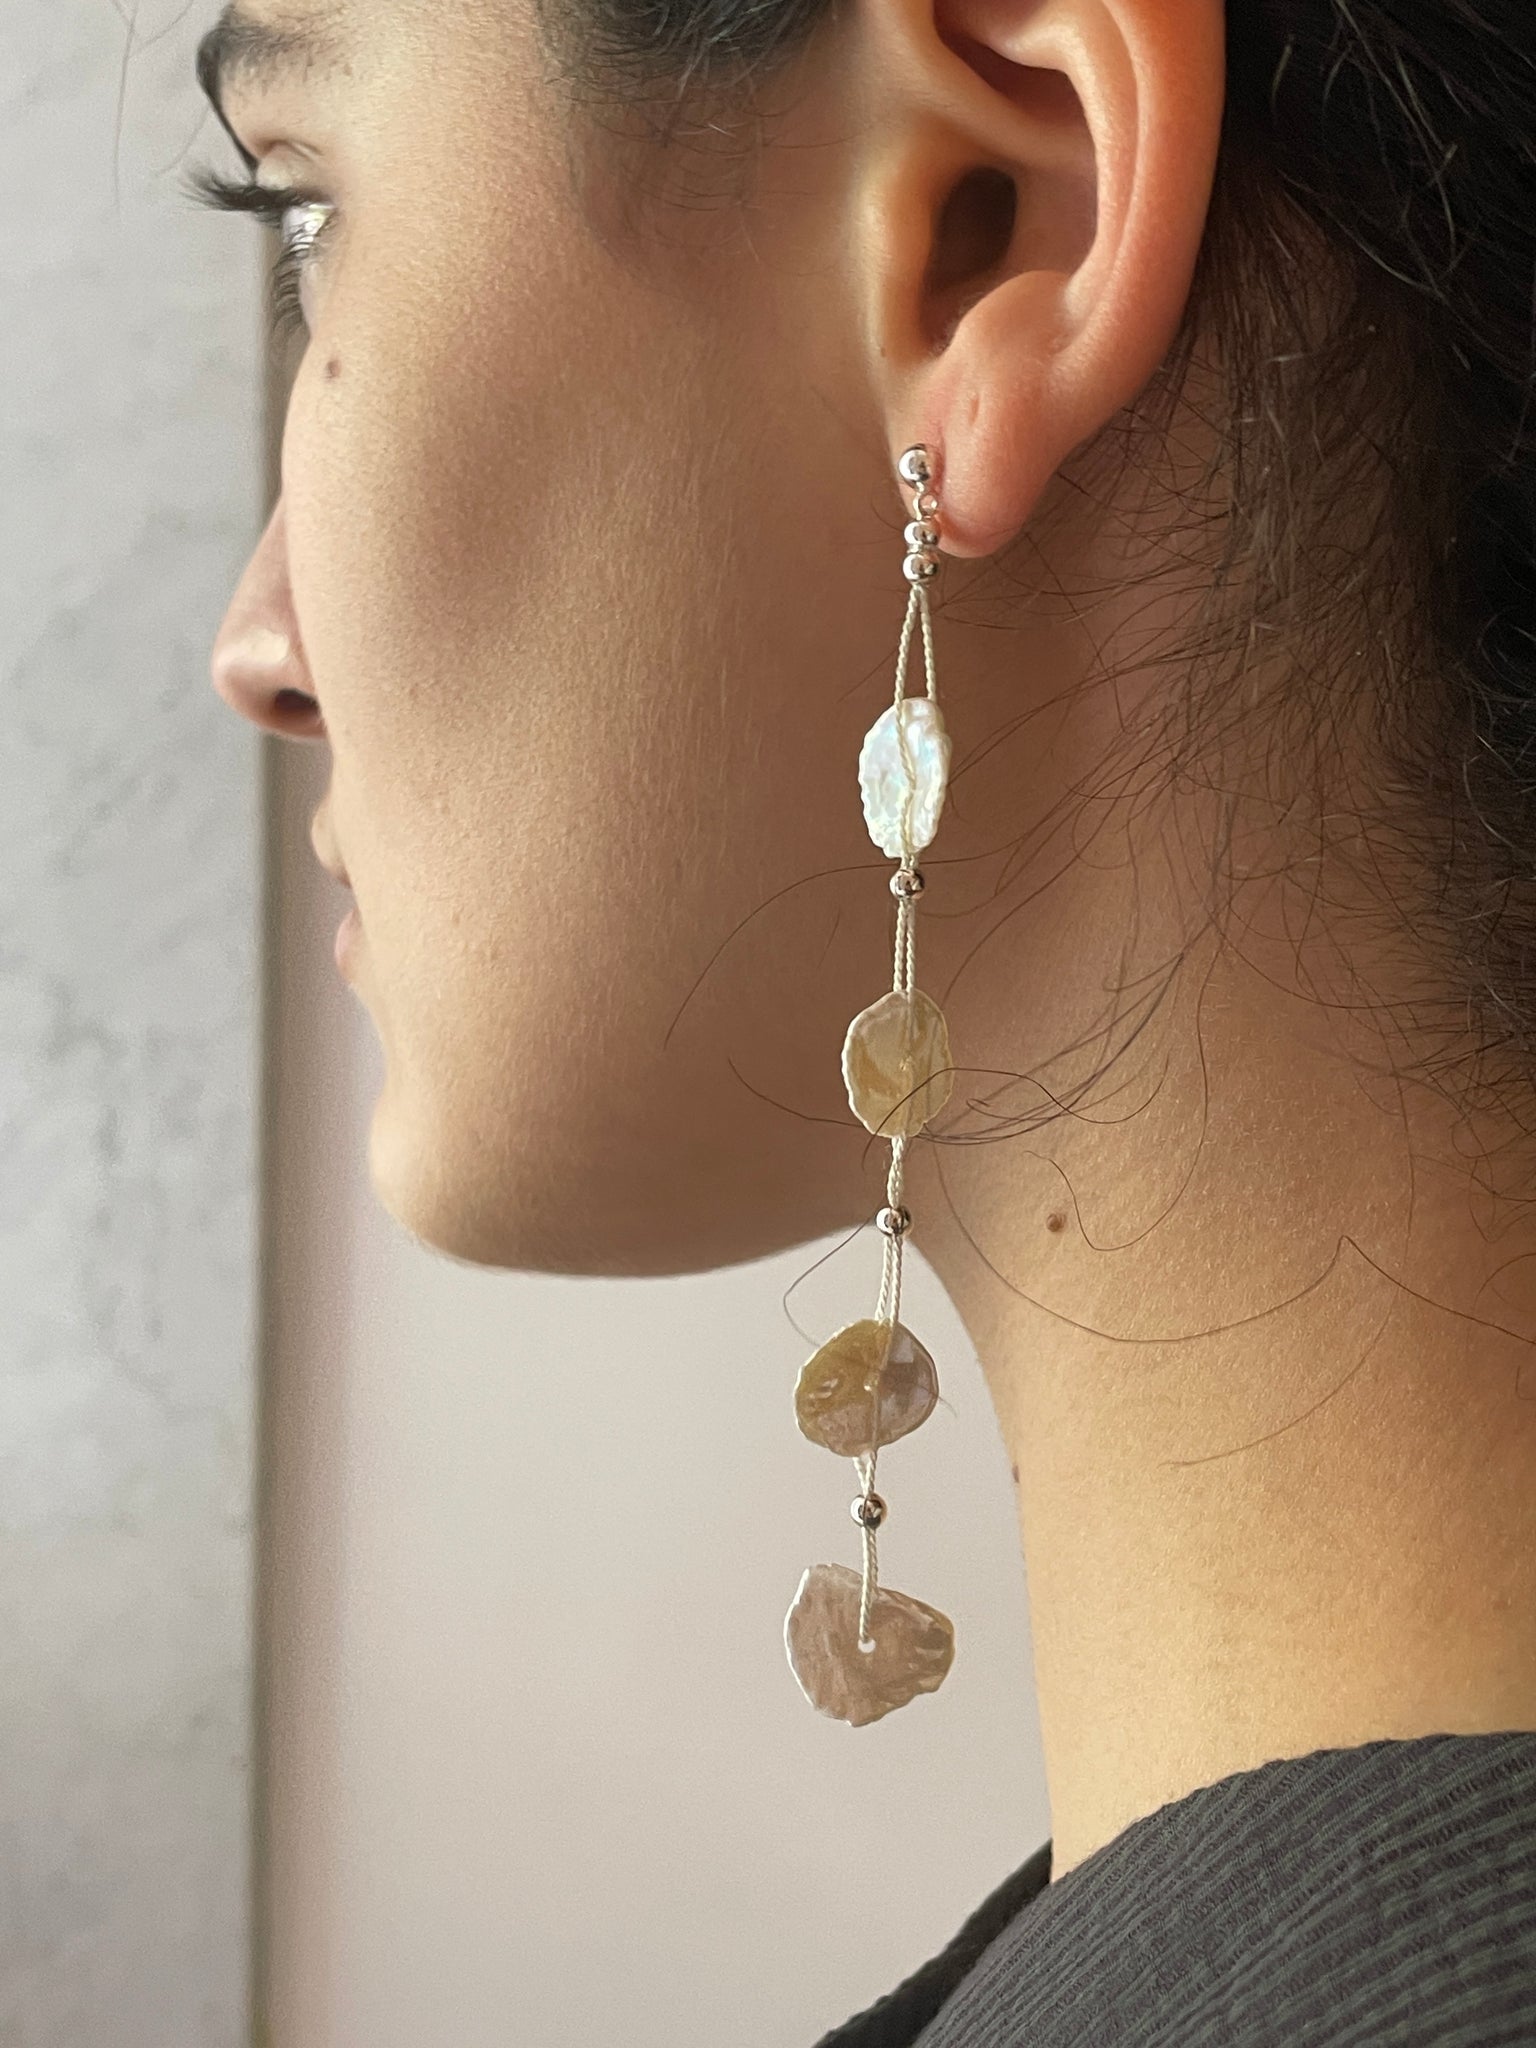 Everything Has An End Earrings, Floating Pearl